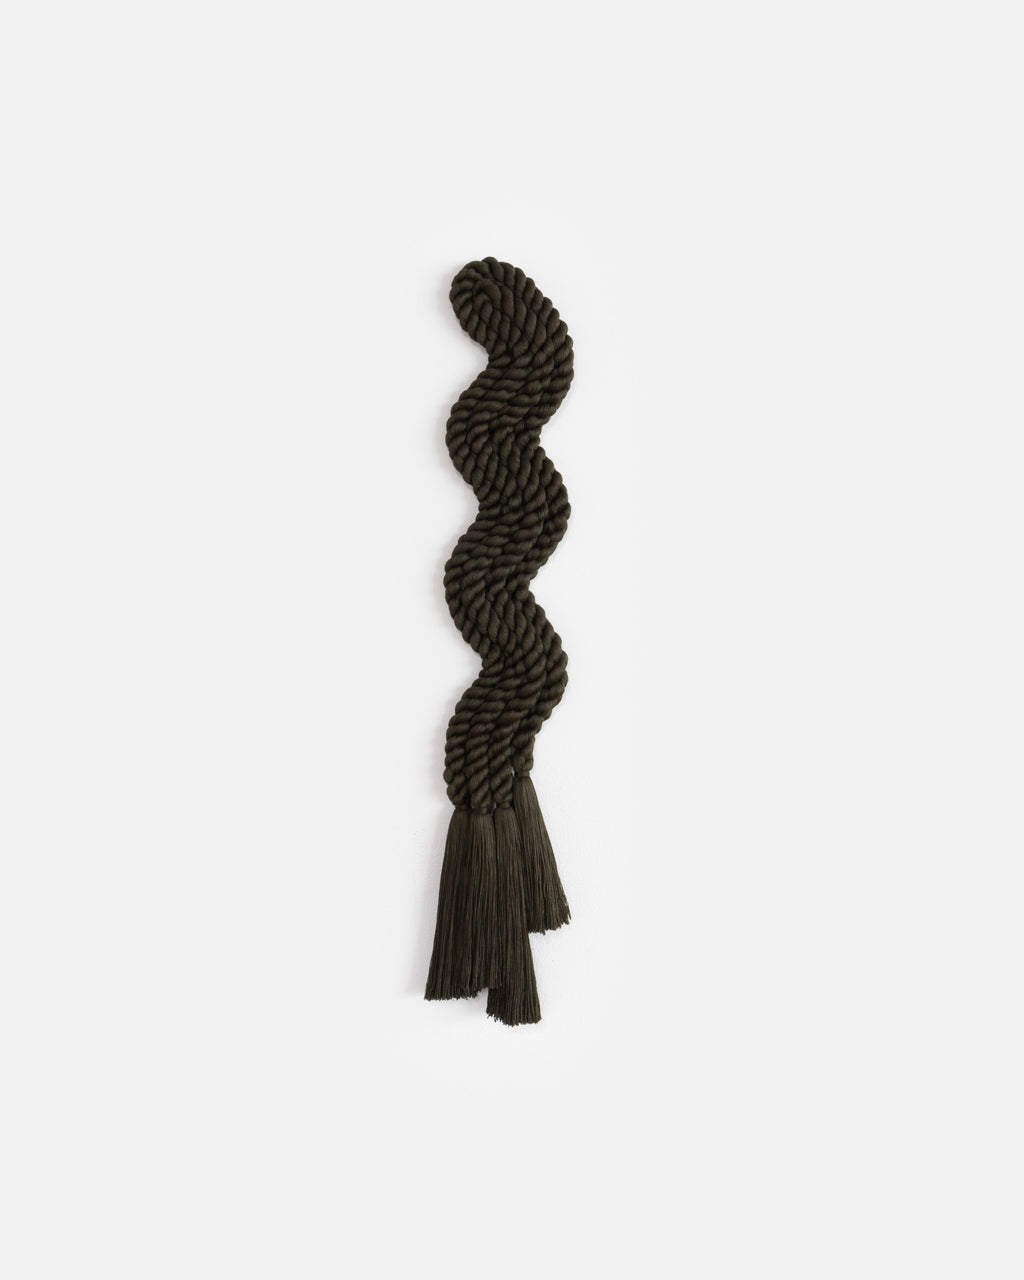 Vertical Rope Squiggle (Deep Green)